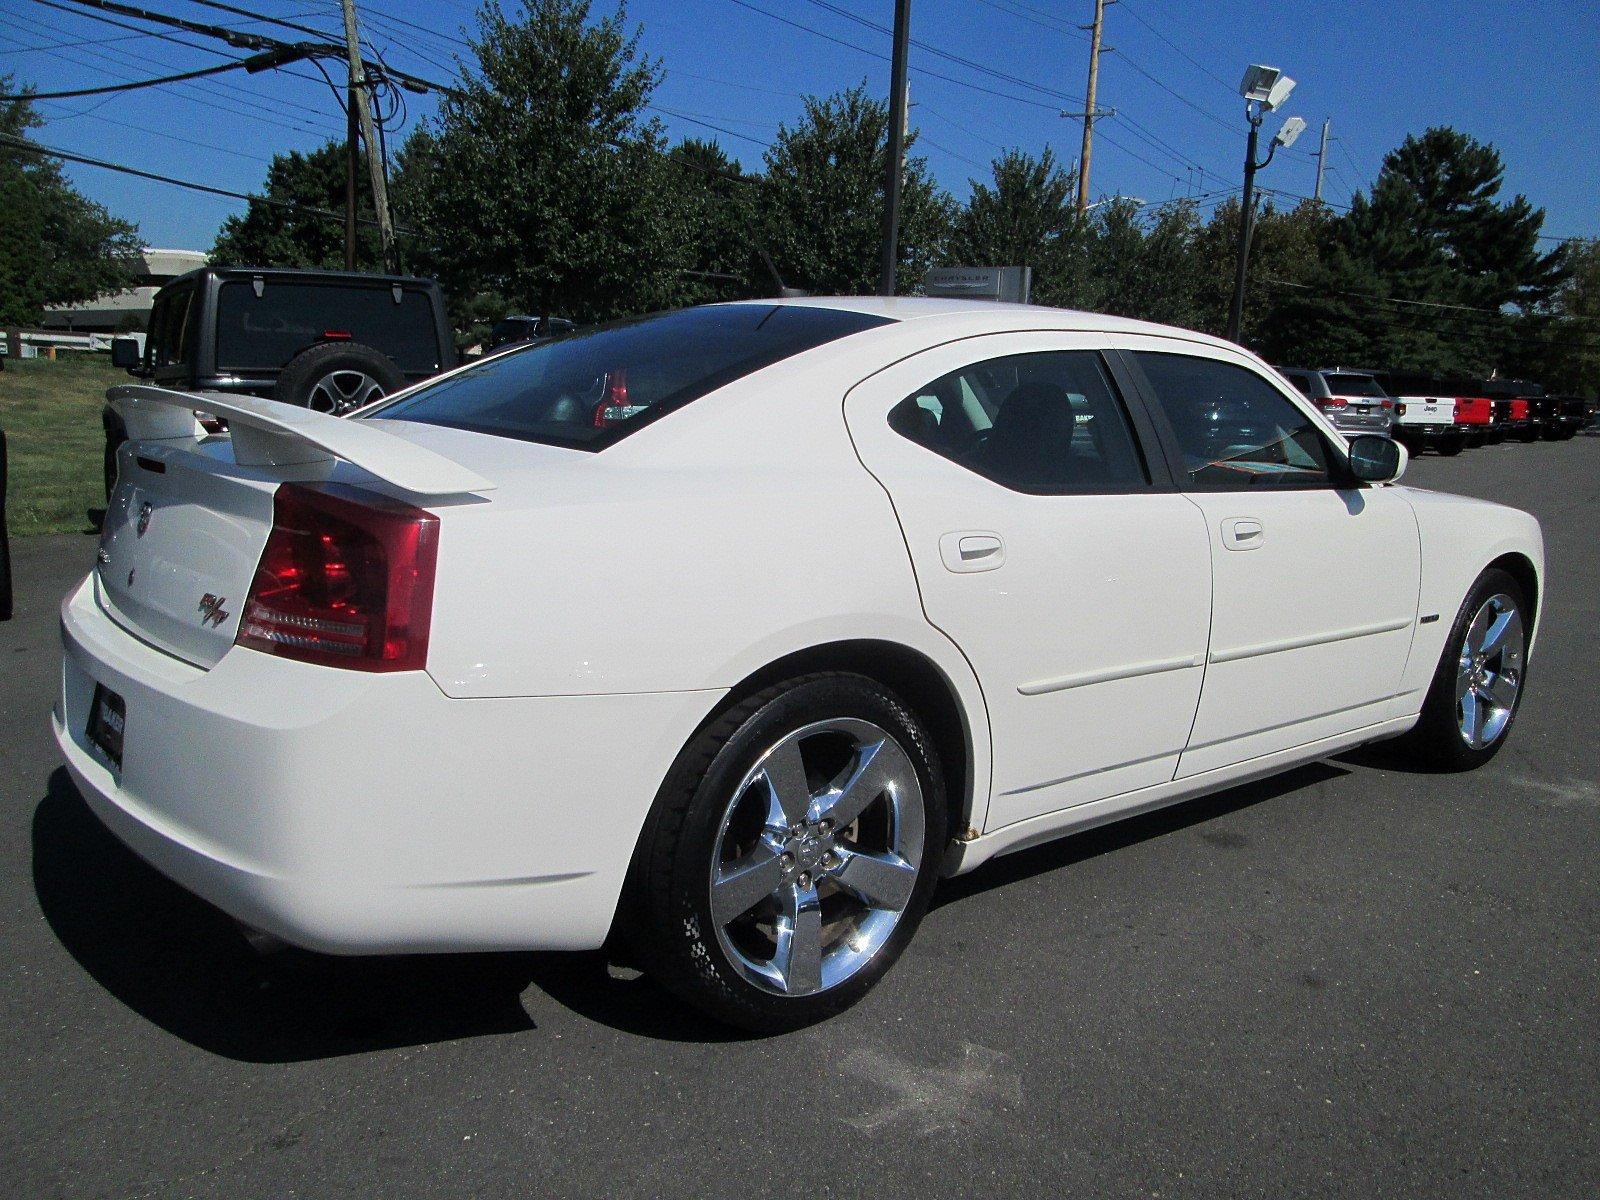 Used 2008 Dodge Charger R/T For Sale ($9,495) | Victory Lotus Stock #321370